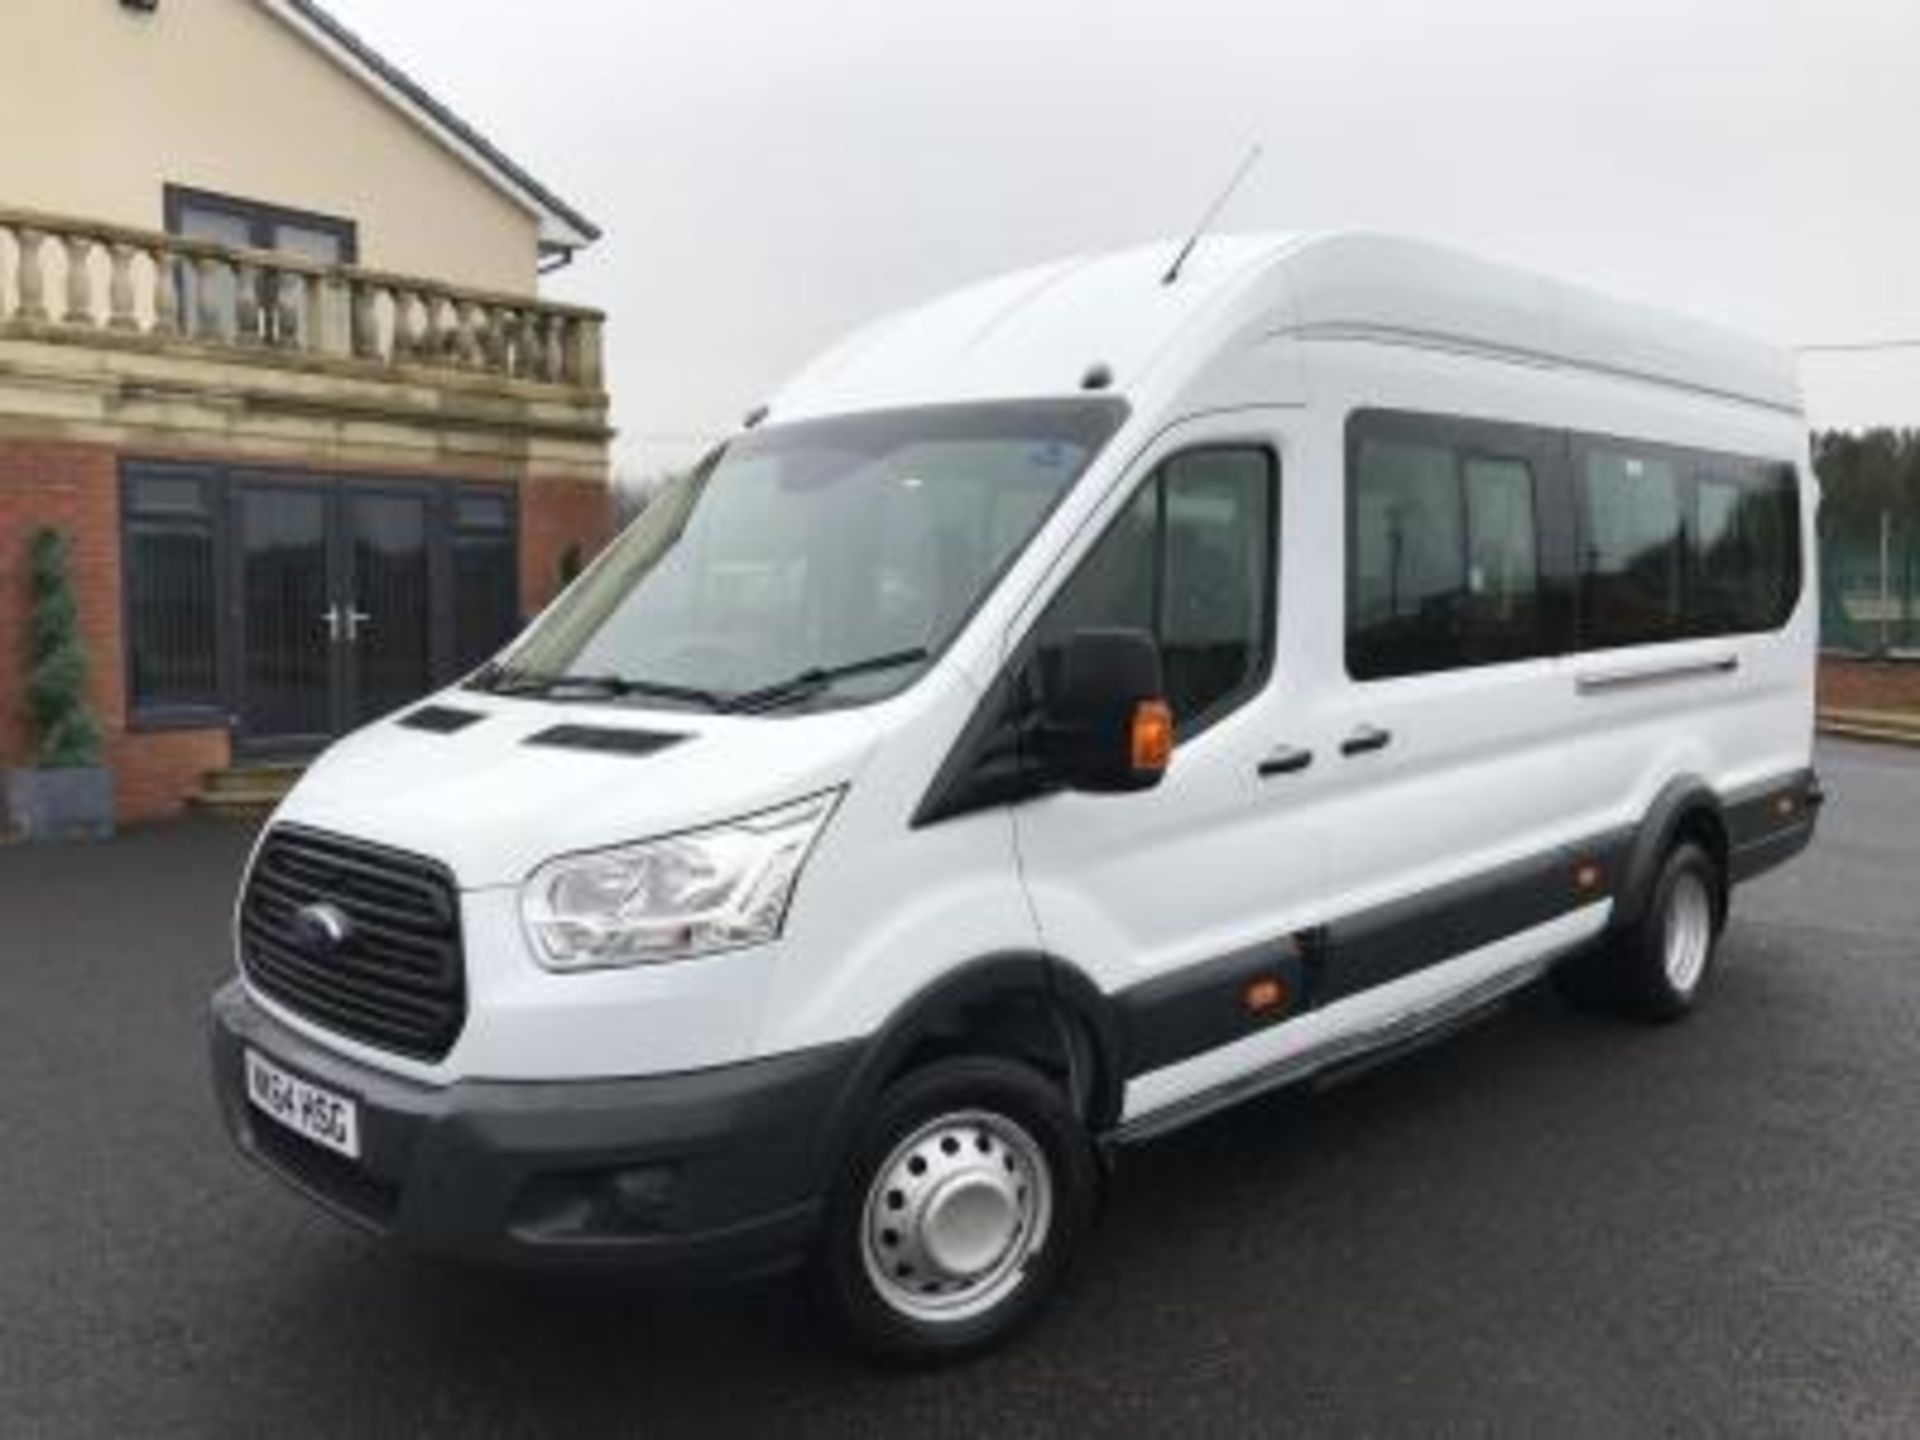 2014 (64) FORD TRANSIT 460 ECONETIC TECH, 17 SEAT MINI BUS, DIESEL, ONLY 24,000 MILES *PLUS VAT* - Image 2 of 21